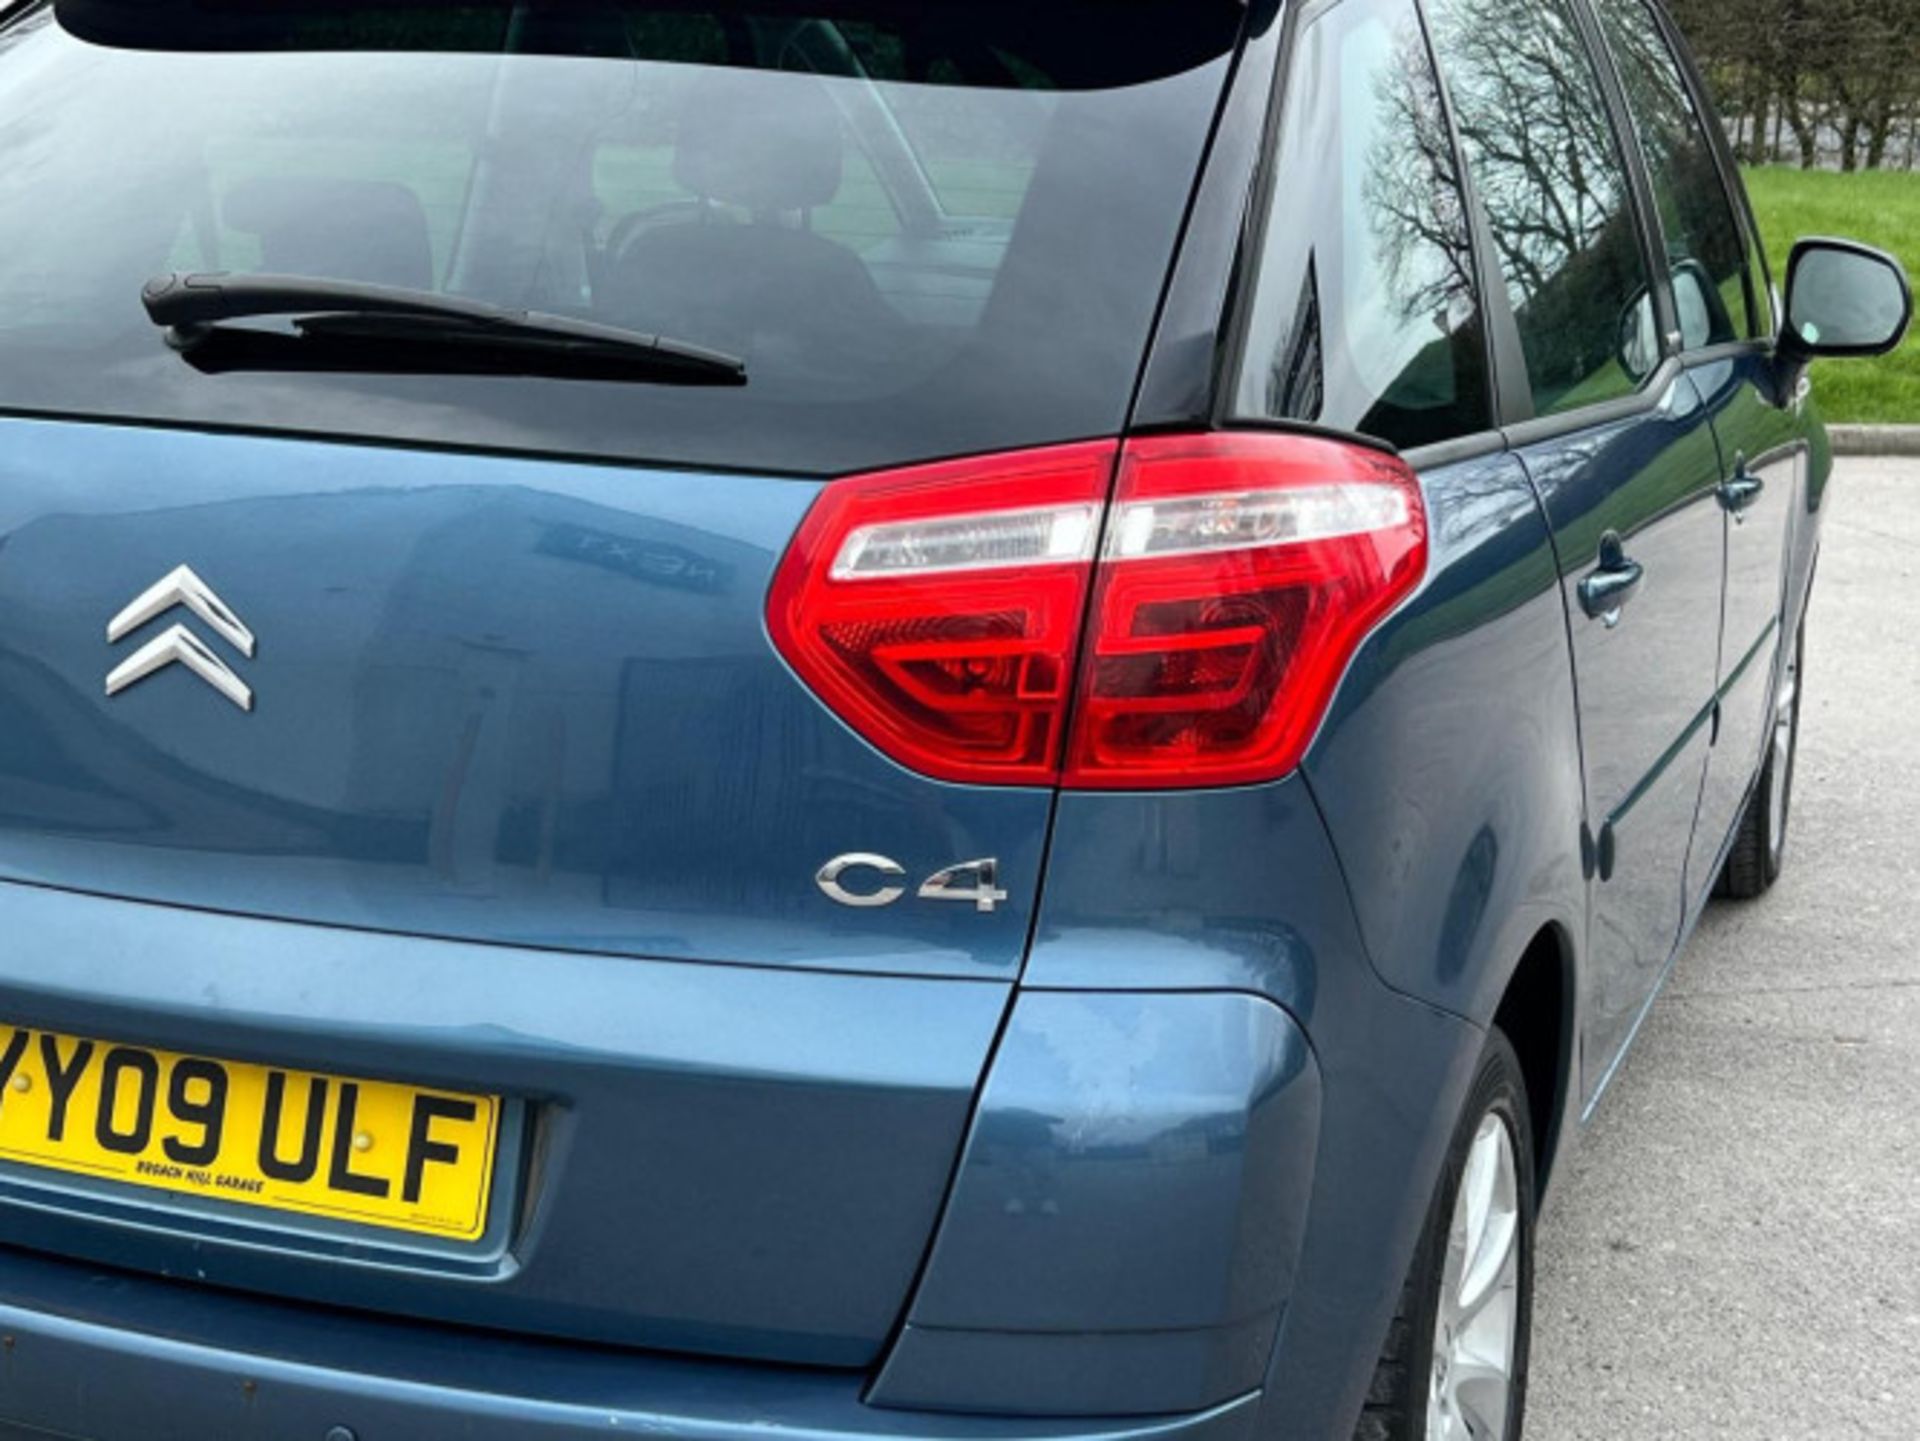 2009 CITROEN C4 PICASSO 1.6 HDI VTR+ EGS6 5DR >>--NO VAT ON HAMMER--<< - Image 97 of 123